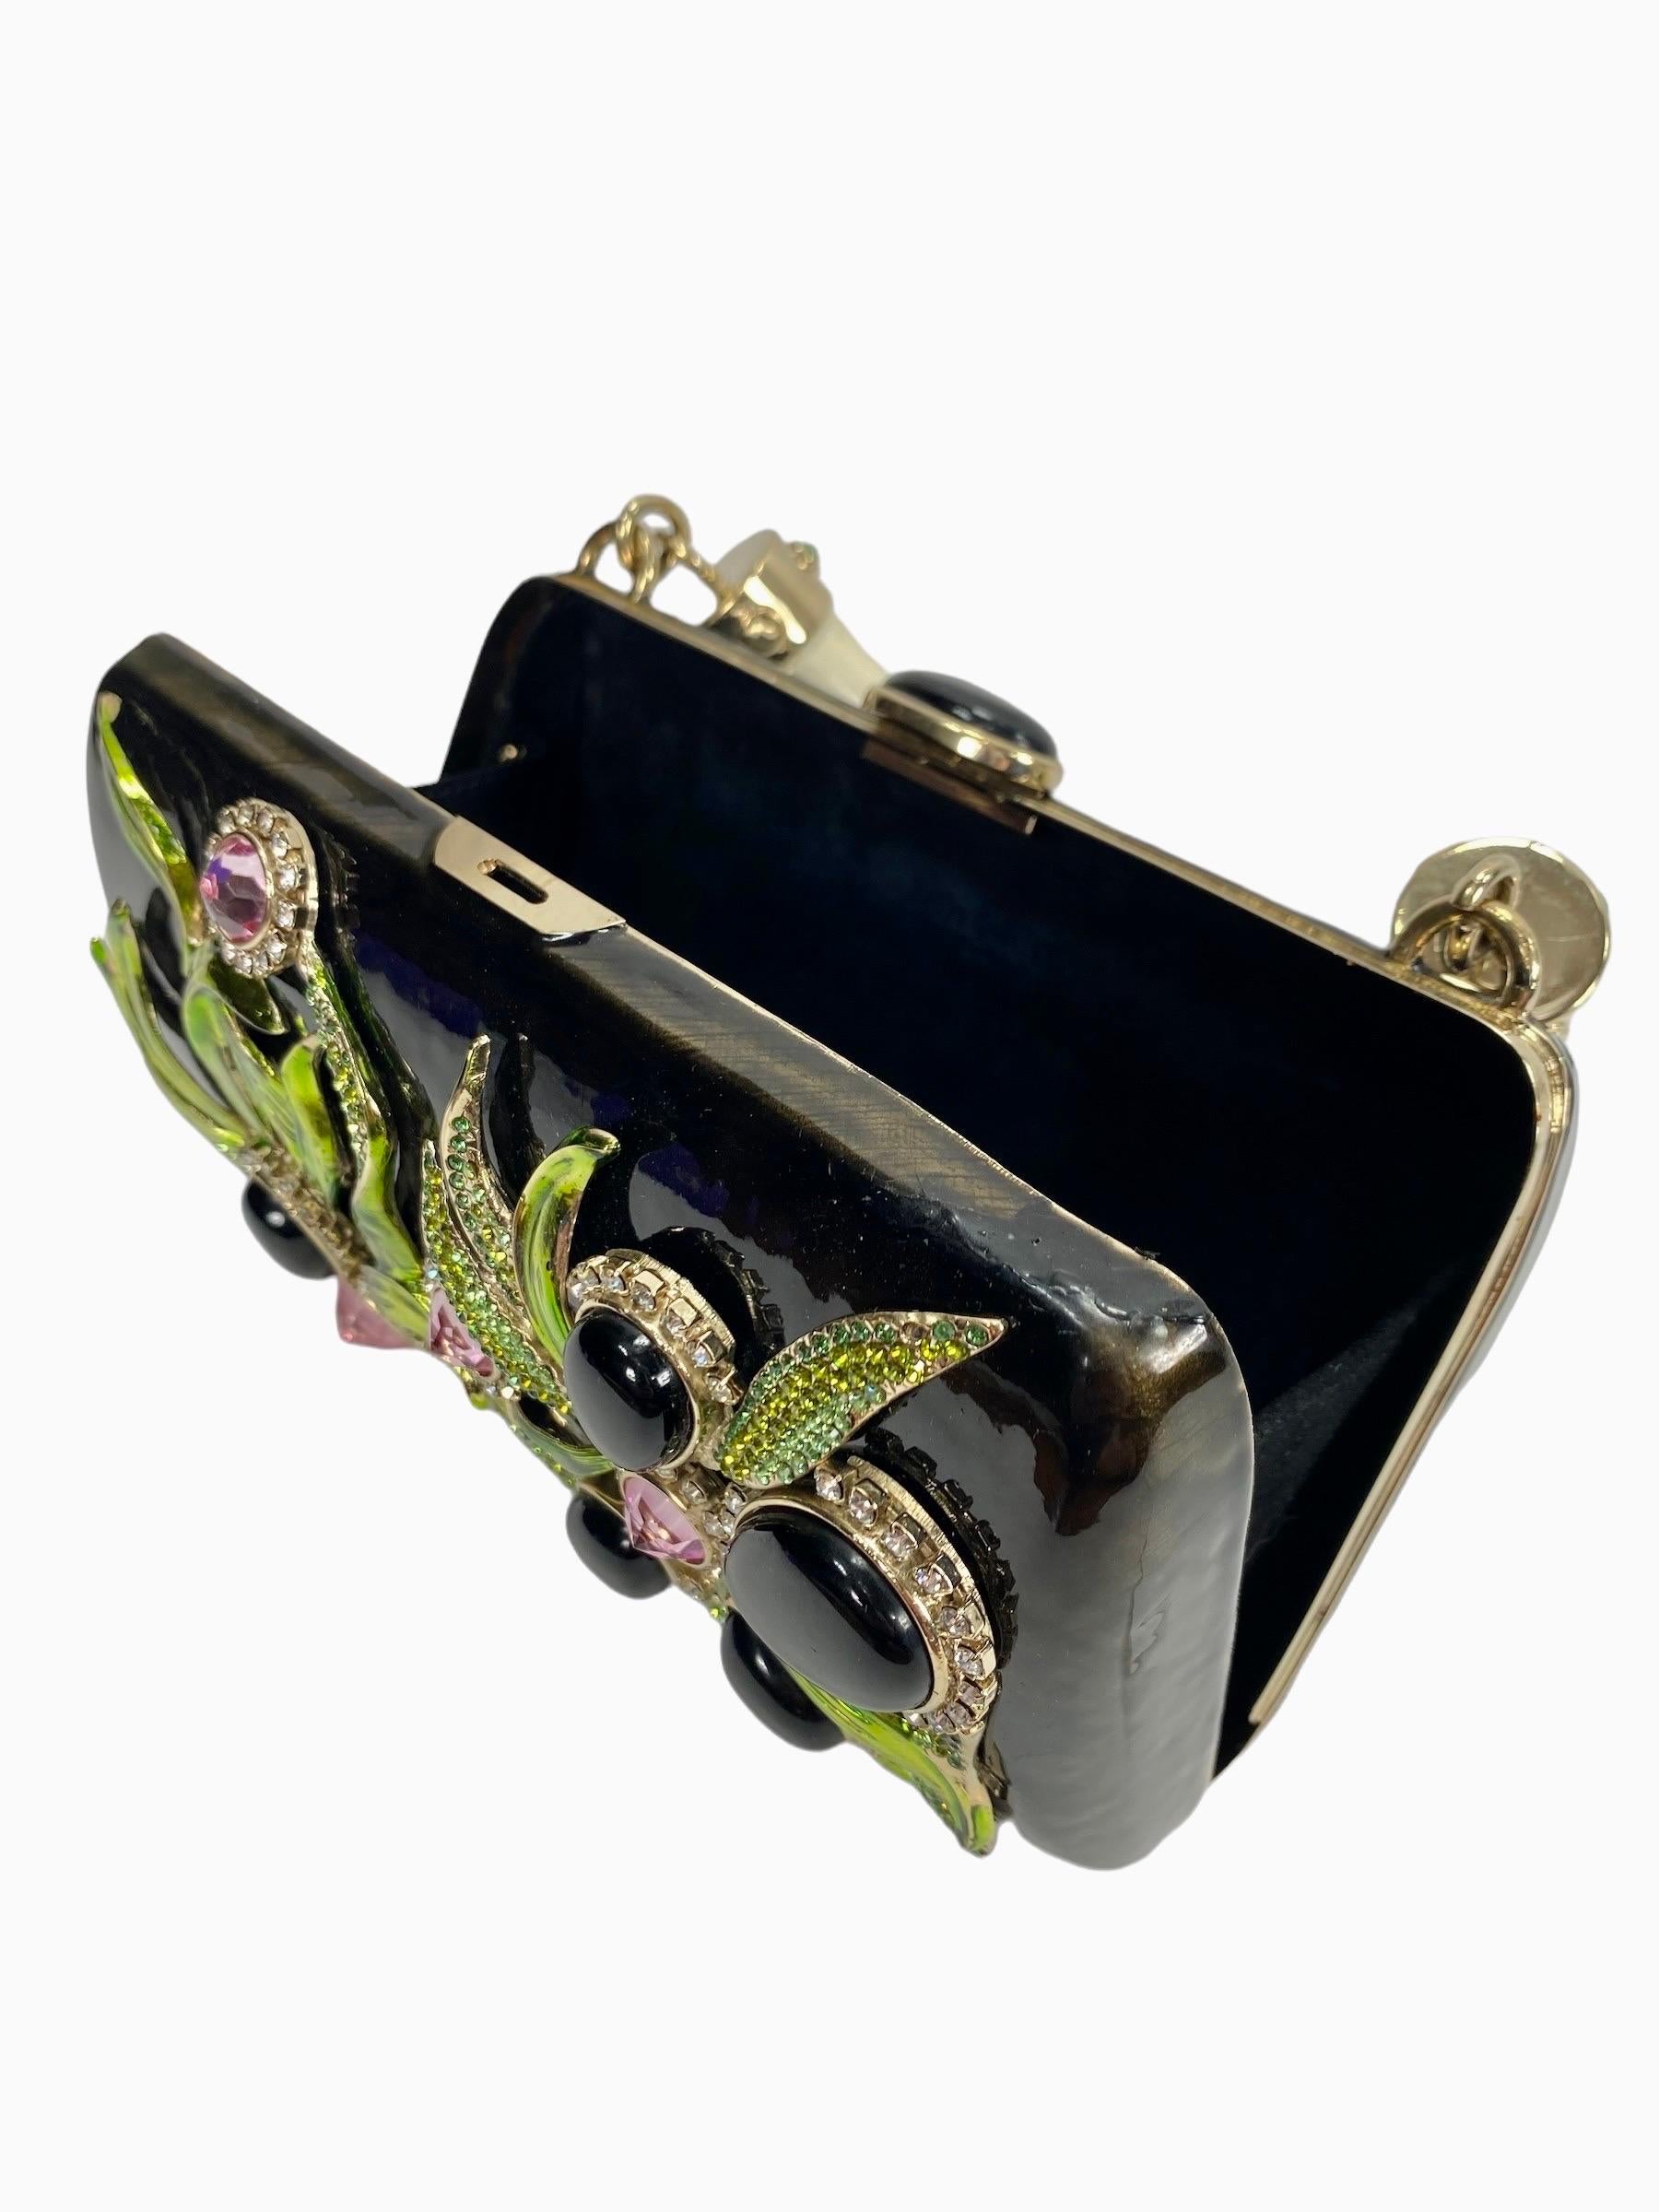 Tom Ford for Yves Saint Laurent Rive Gauche S/S 2004 Enamel Jeweled Clutch Bag In Excellent Condition For Sale In Montgomery, TX